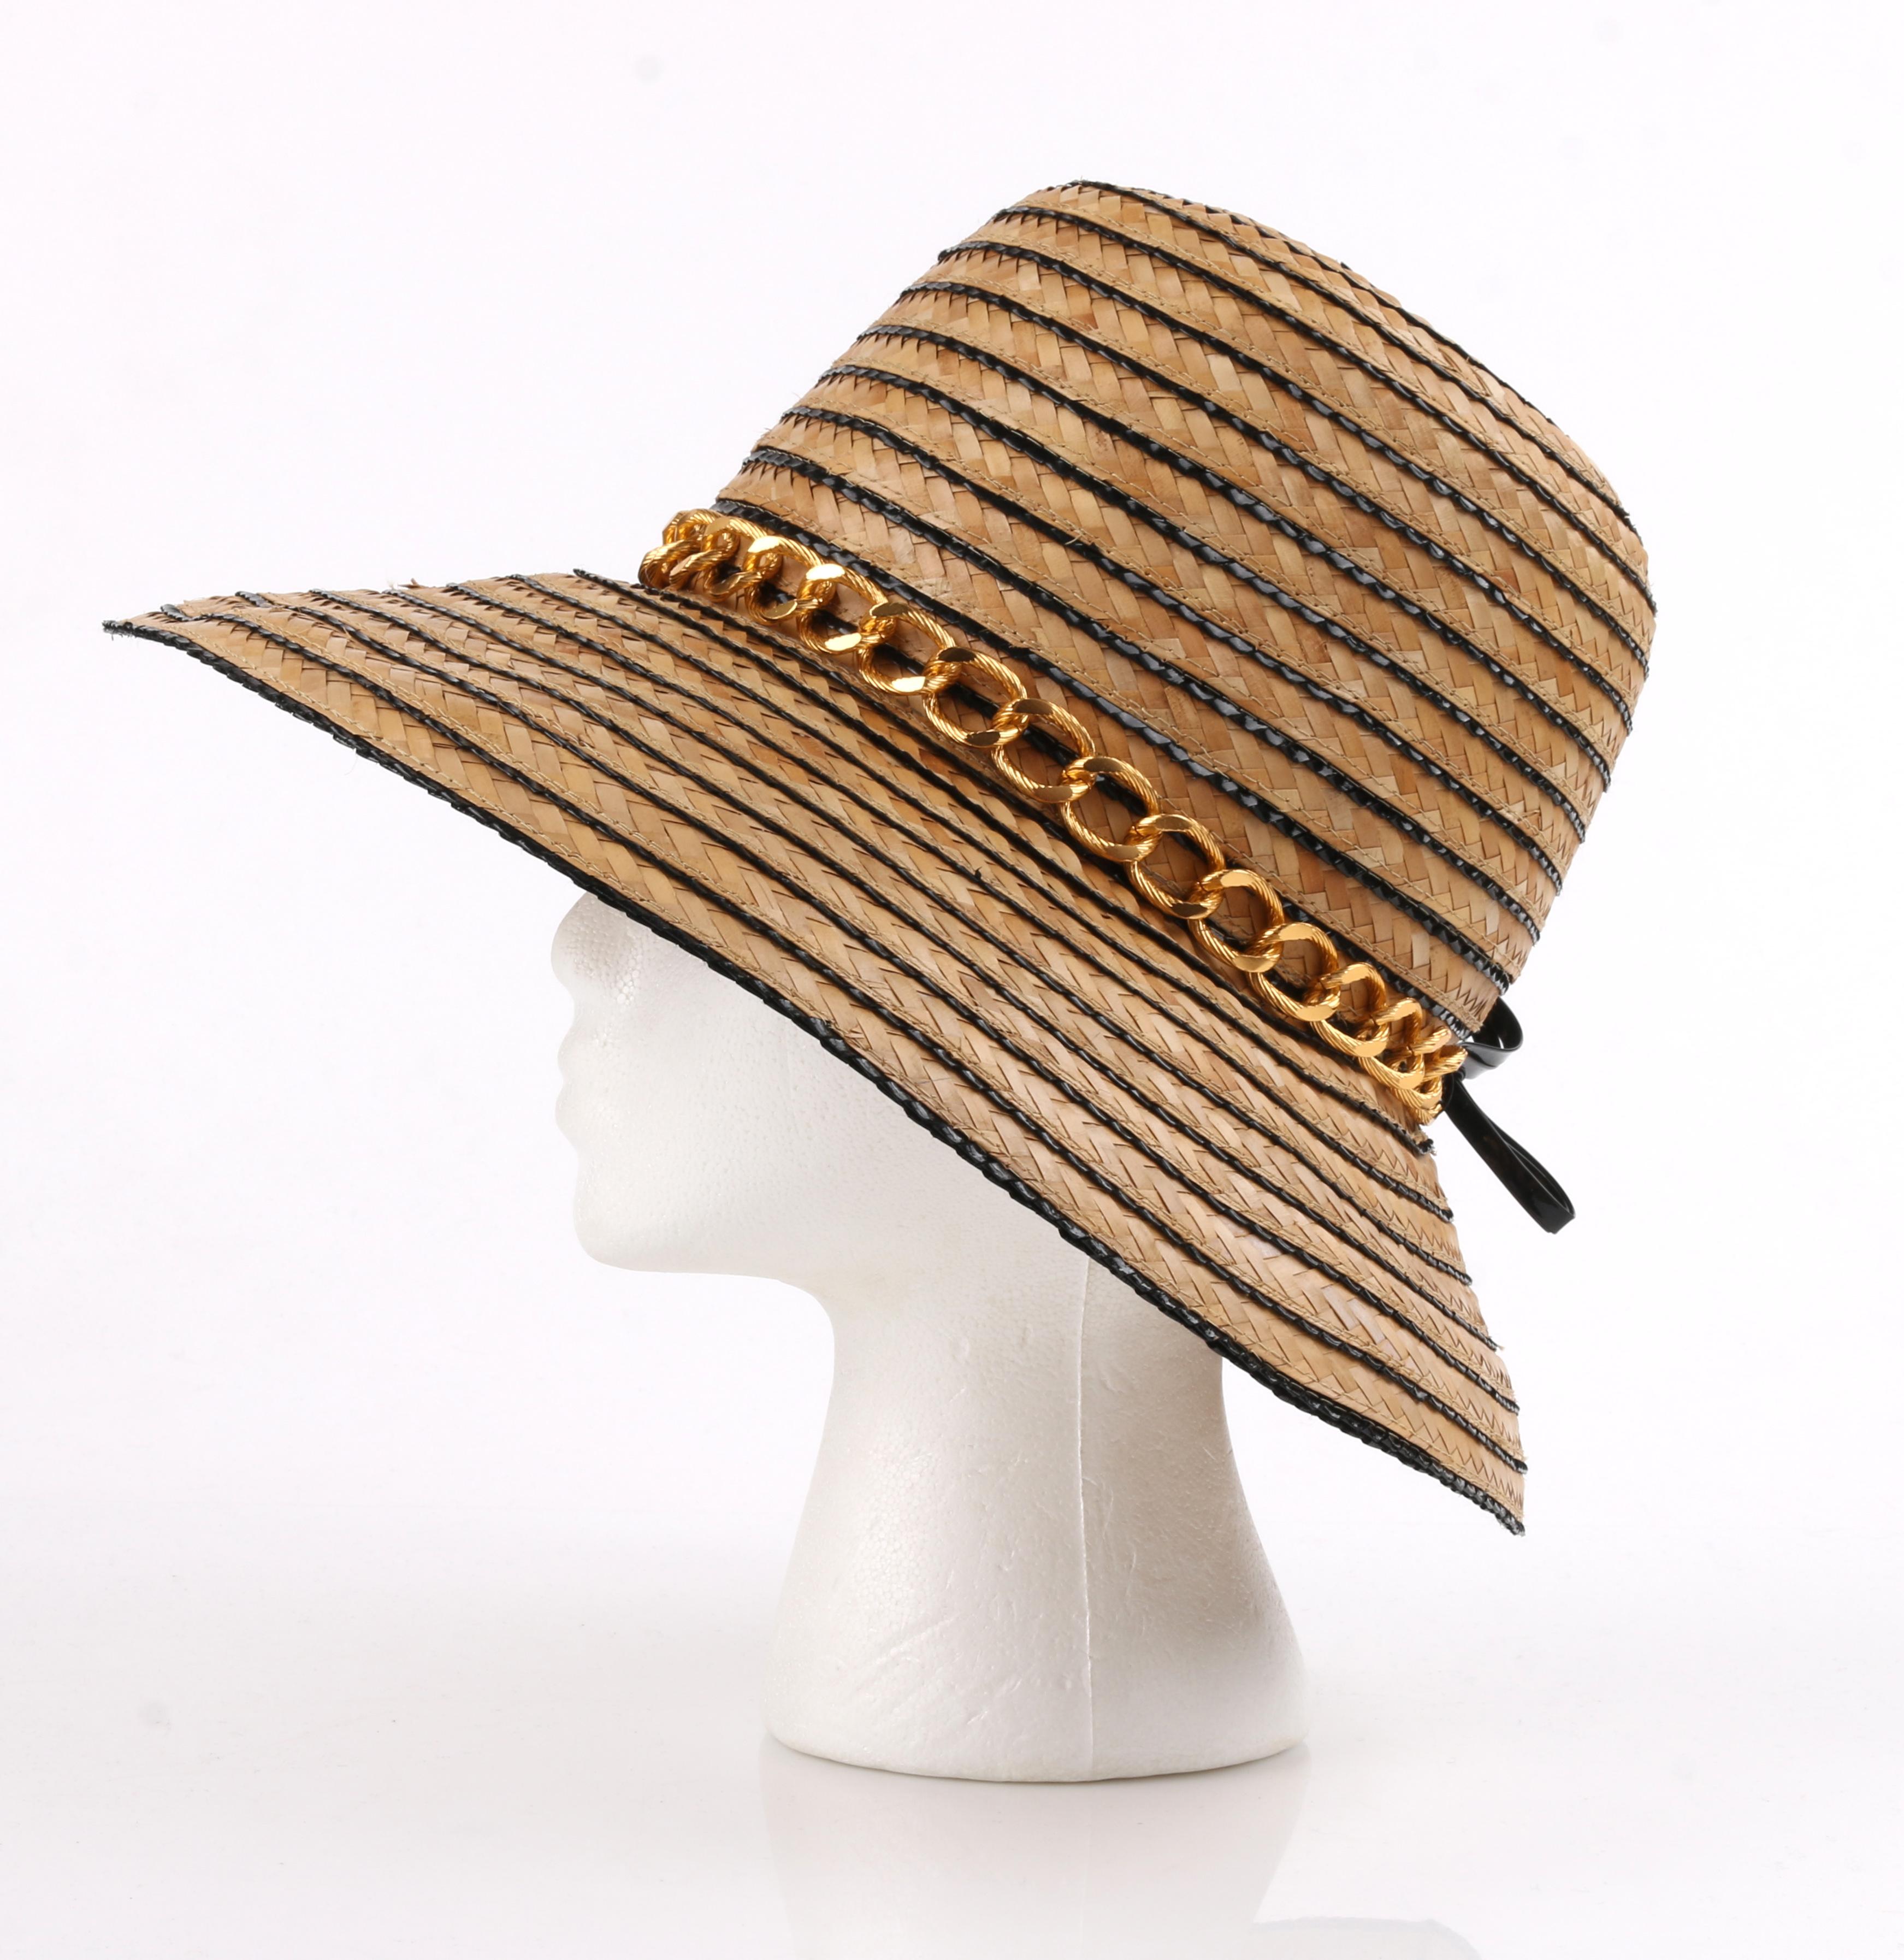 Women's Miss Dior by CHRISTIAN DIOR c.1960’s Black Gold Woven Straw Bow Chain Sun Hat